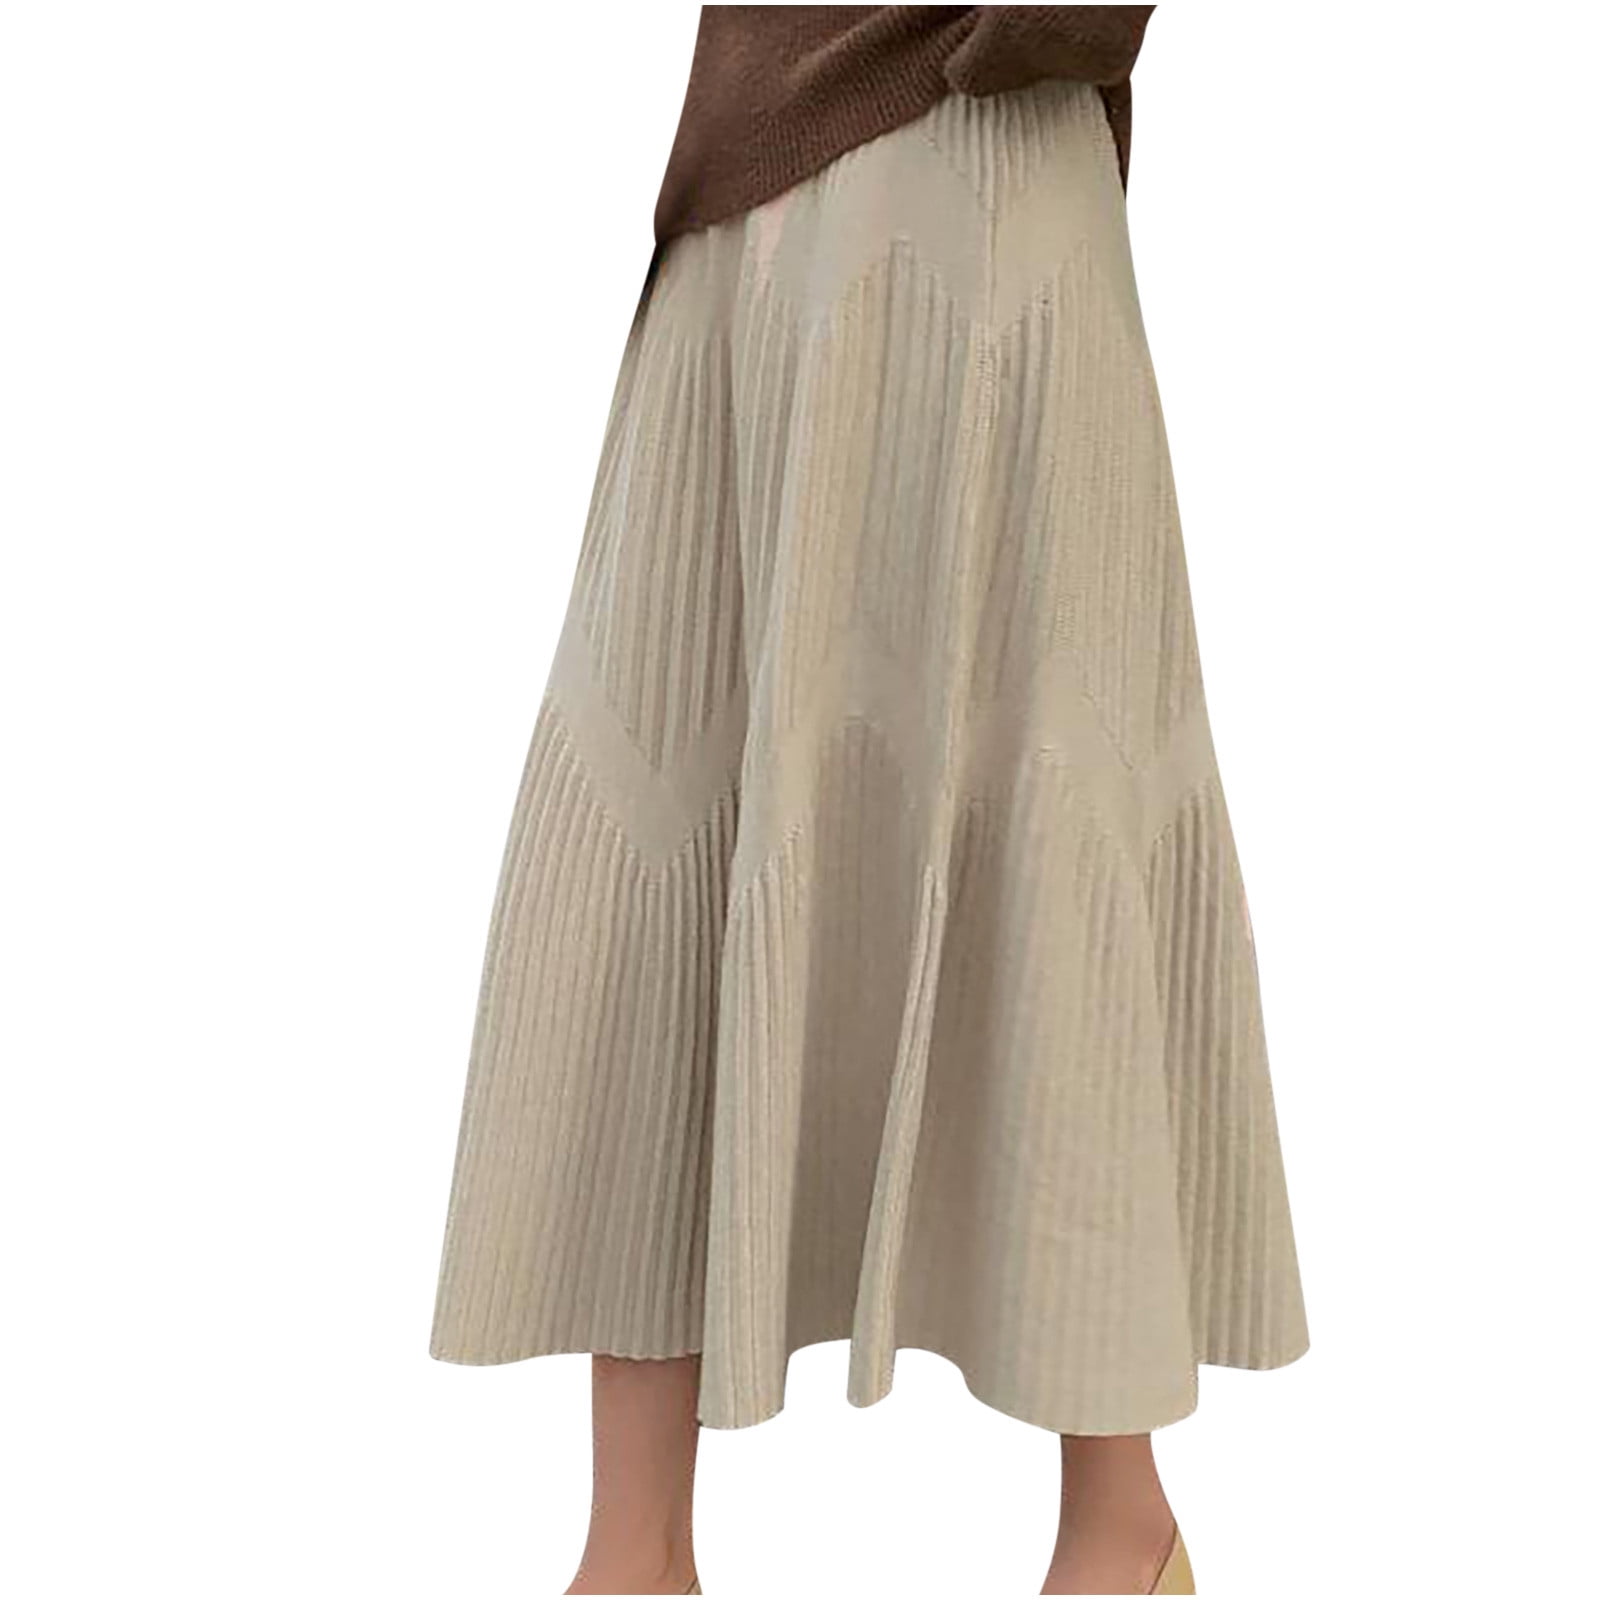 Clearance Long Skirts for Women Women s Elegant High Waist Ribbed Skirt A Line Flared Mid length Skirt Winter Stretchy Casual Pleated Skirts 6c6350b6 4501 430f bf78 56b7bffade37.6f2b5e092f06c9f73857f14d9c05db87